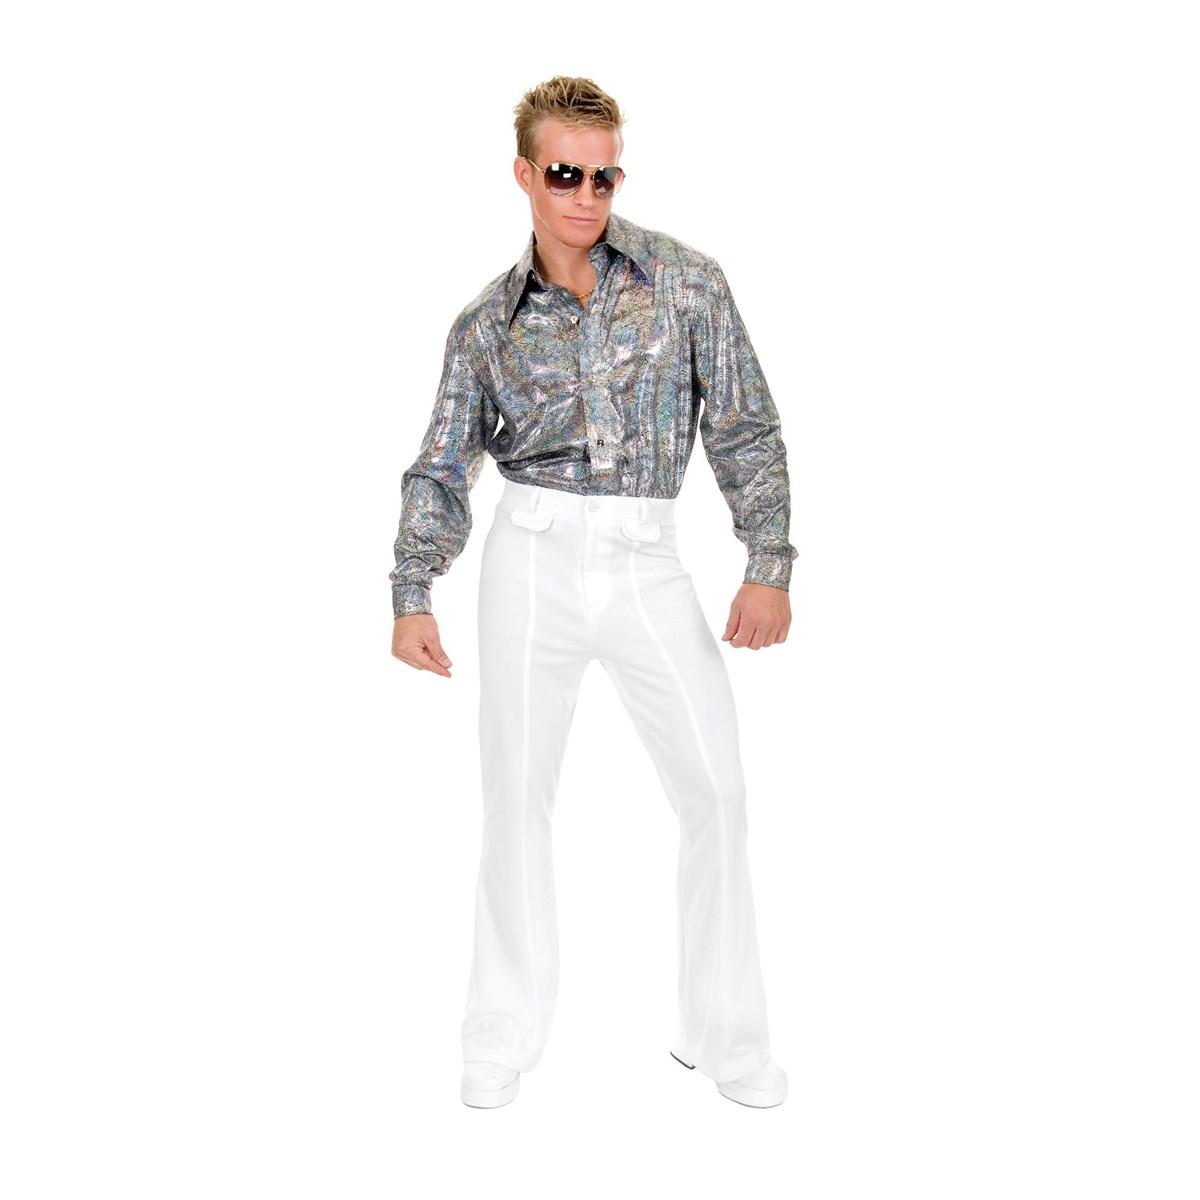 Picture of Charades Costumes 276753 Halloween Mens White Disco Pants - Waist-46